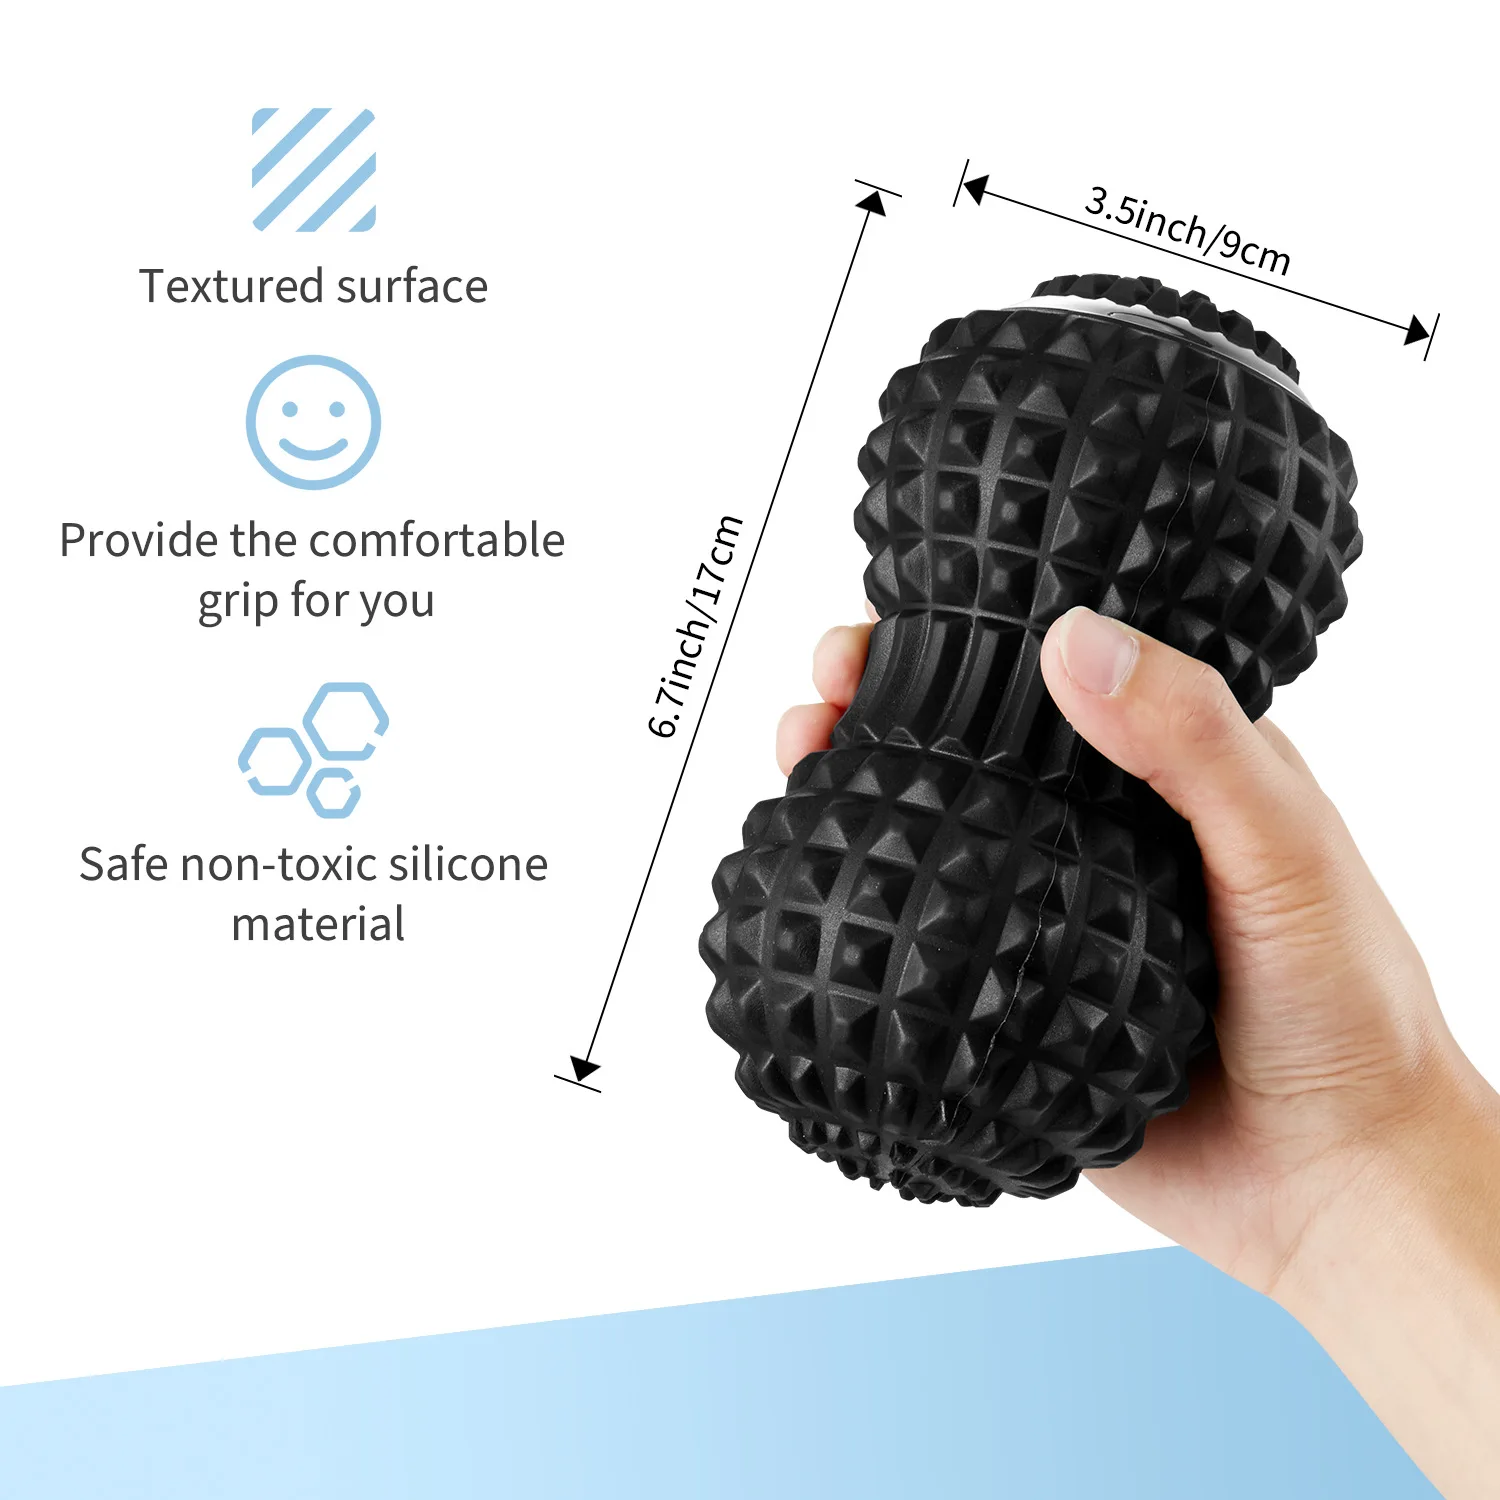 Electric Massage Ball 4-Speed Vibrating Massage Ball USB Rechargeable Fitness Sport Yoga Foam Roller Back Roller Fitness 10 pcs lot mark cup skateboard football soccer rugby speed fitness equipment drill space marker cones slalom for roller skating